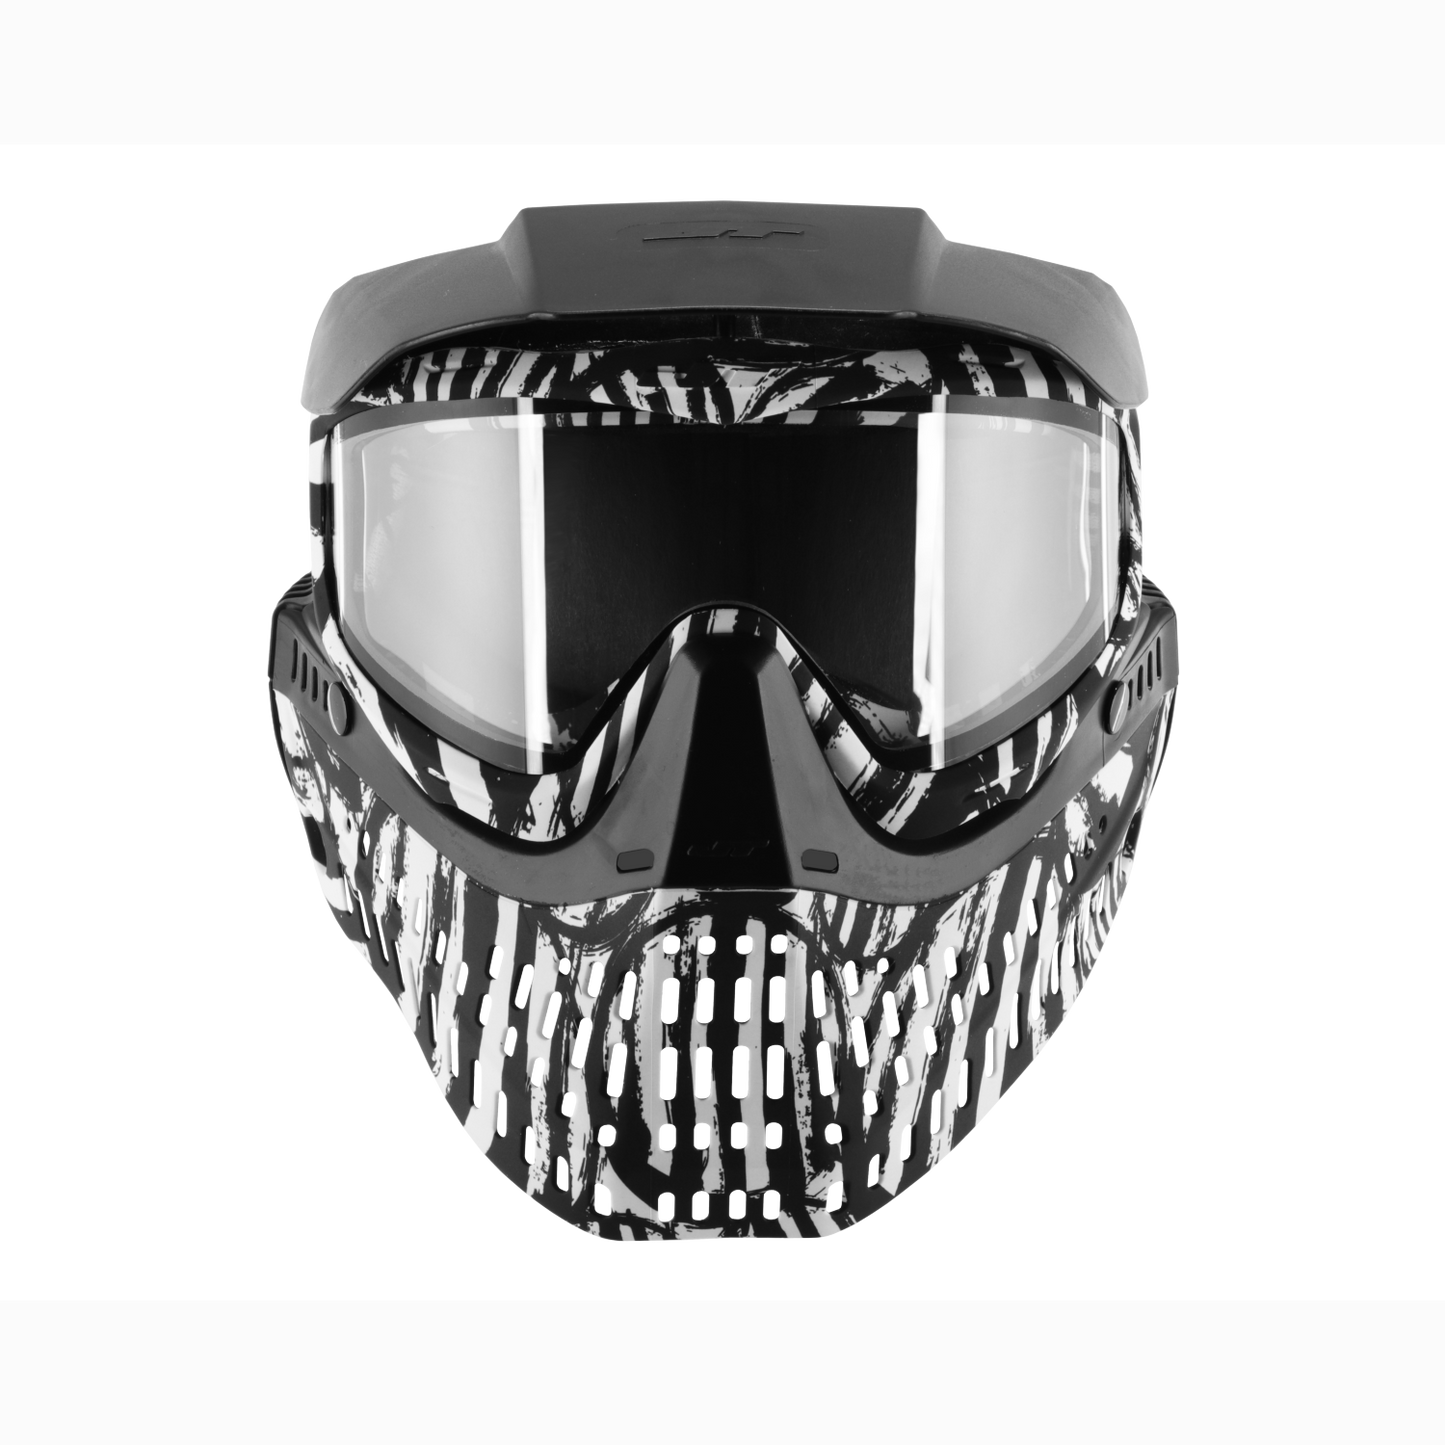 JT Paintball Spectra Proflex Goggle - Zebra Limited Edition - with lens [Thermal Clear & Thermal Smoke]